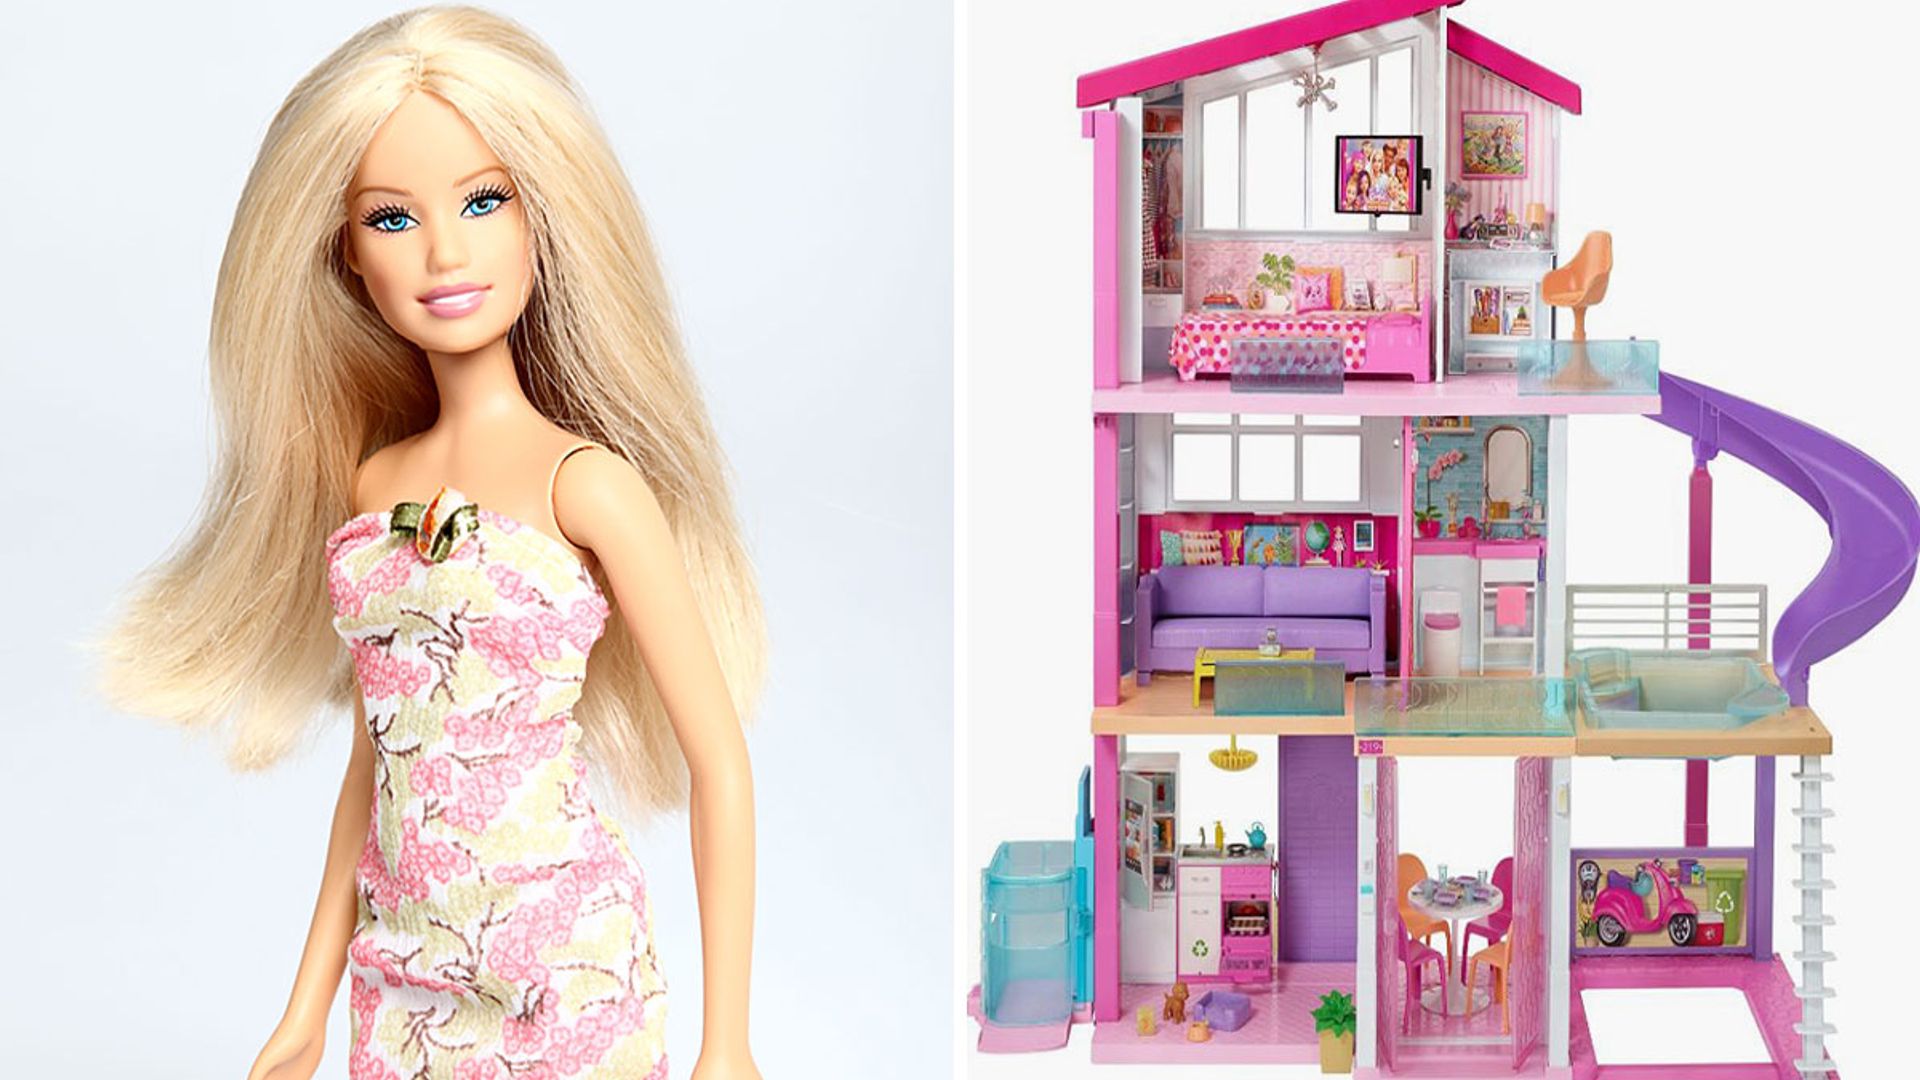 This Barbie dream house is a number one best seller on Amazon for a reason